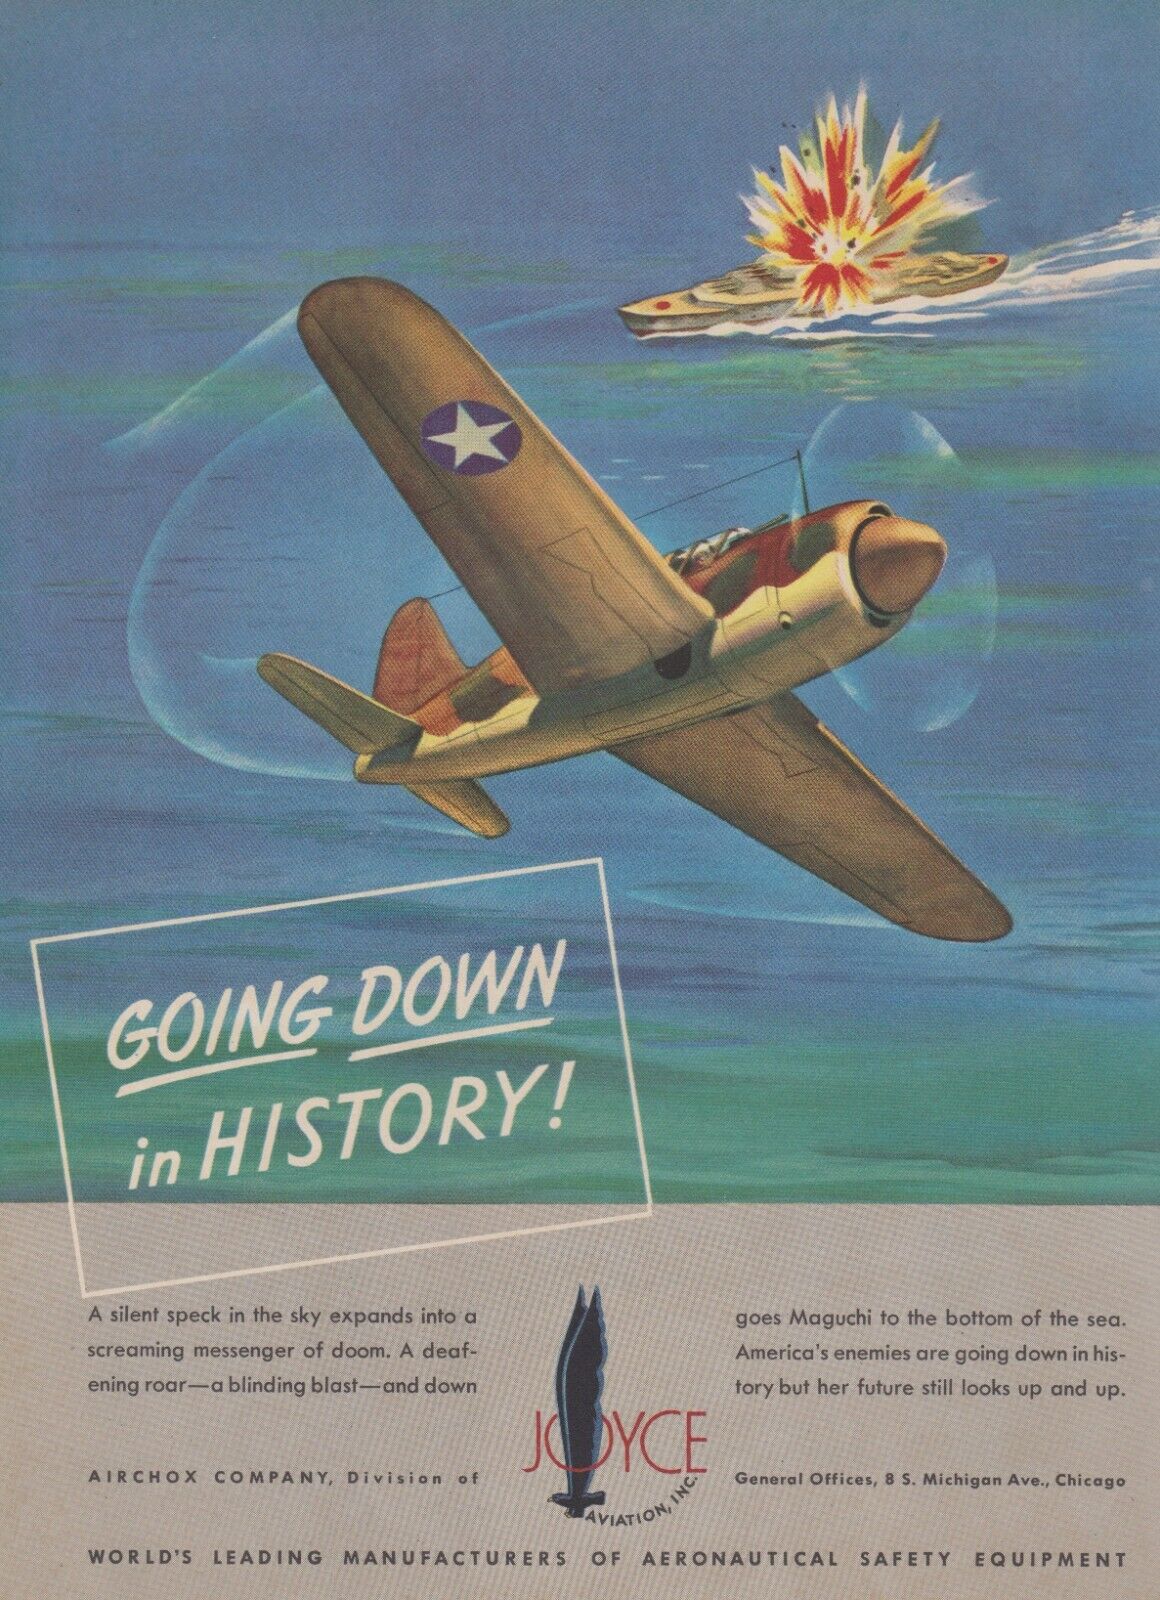 Aviation Magazine Print - Airchox Company and Brewster Buccaneer  (1943)